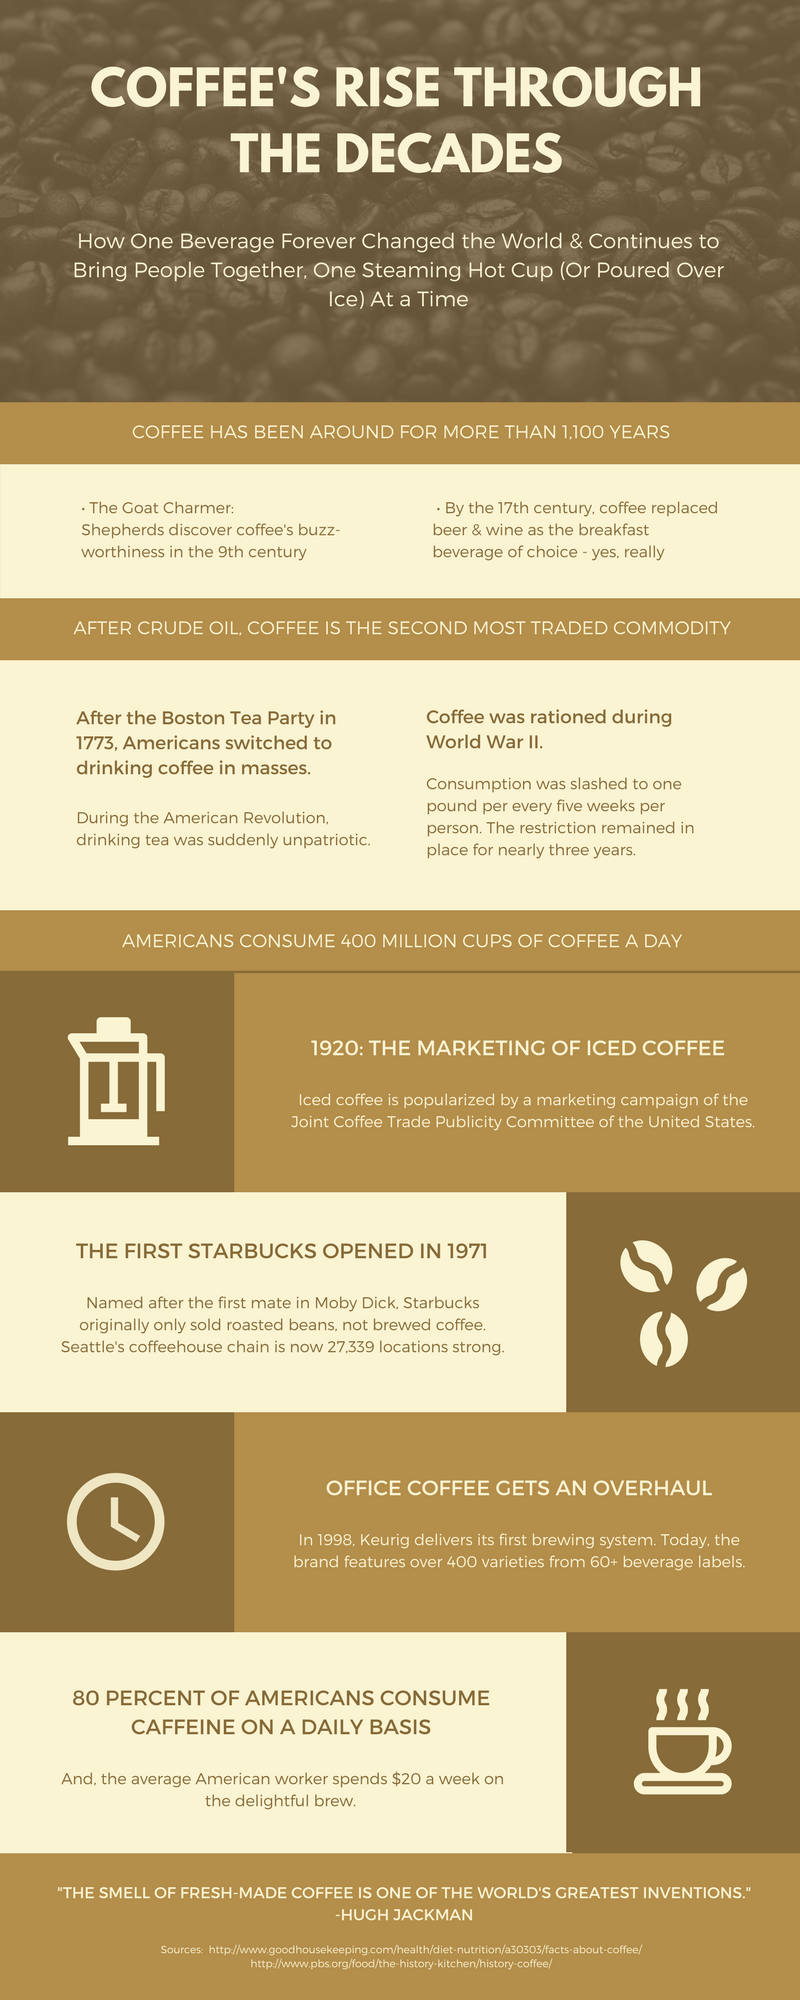 A Visual Look at Coffee's Rise Through the Decades